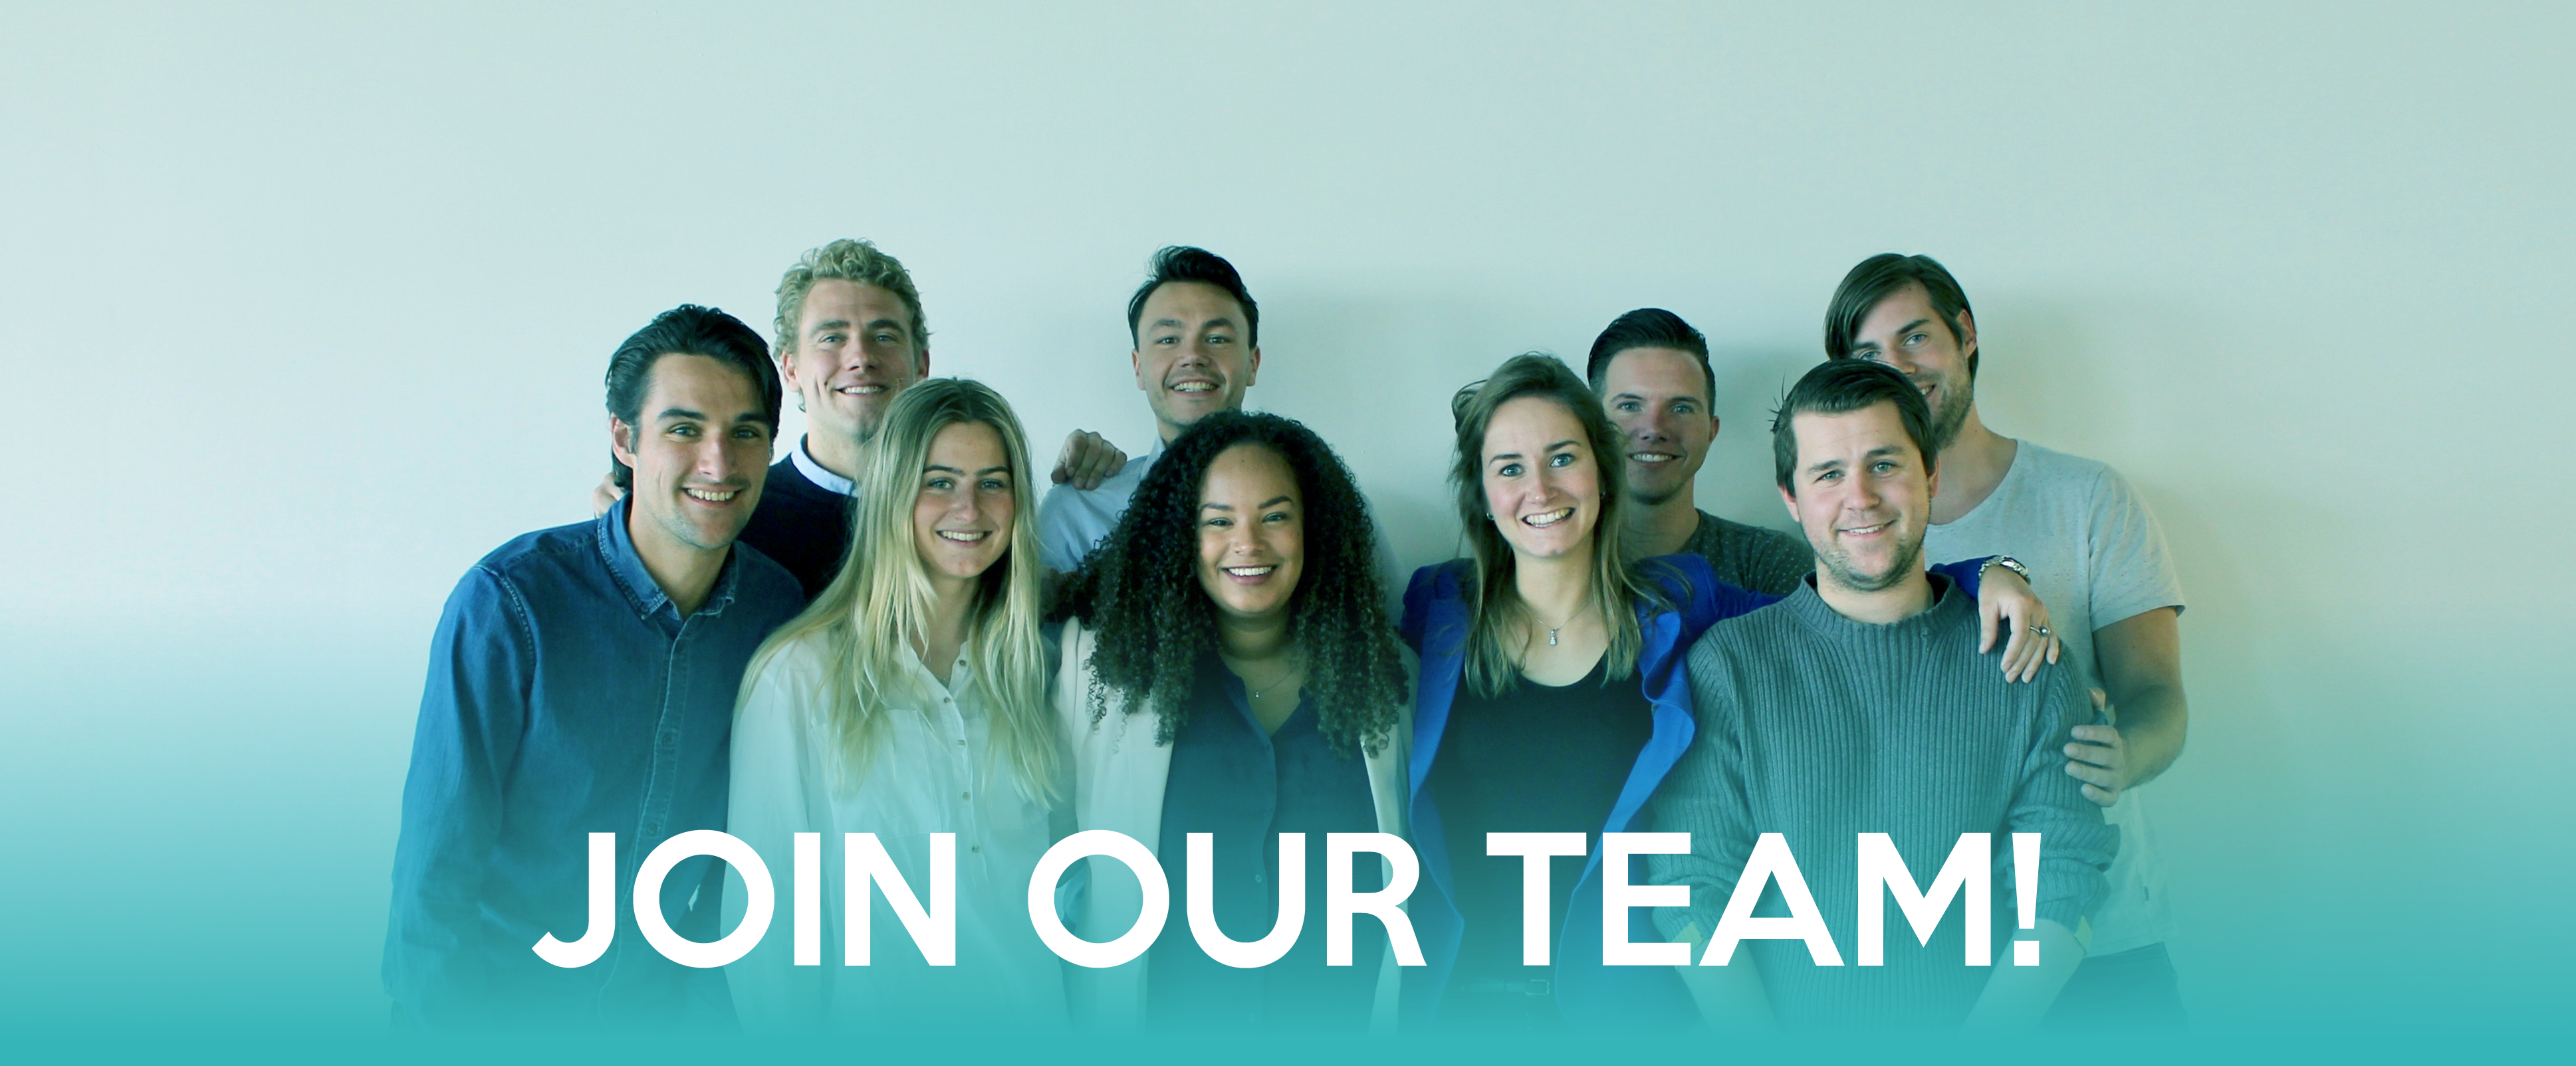 Teamfoto ScanMovers, join our team.